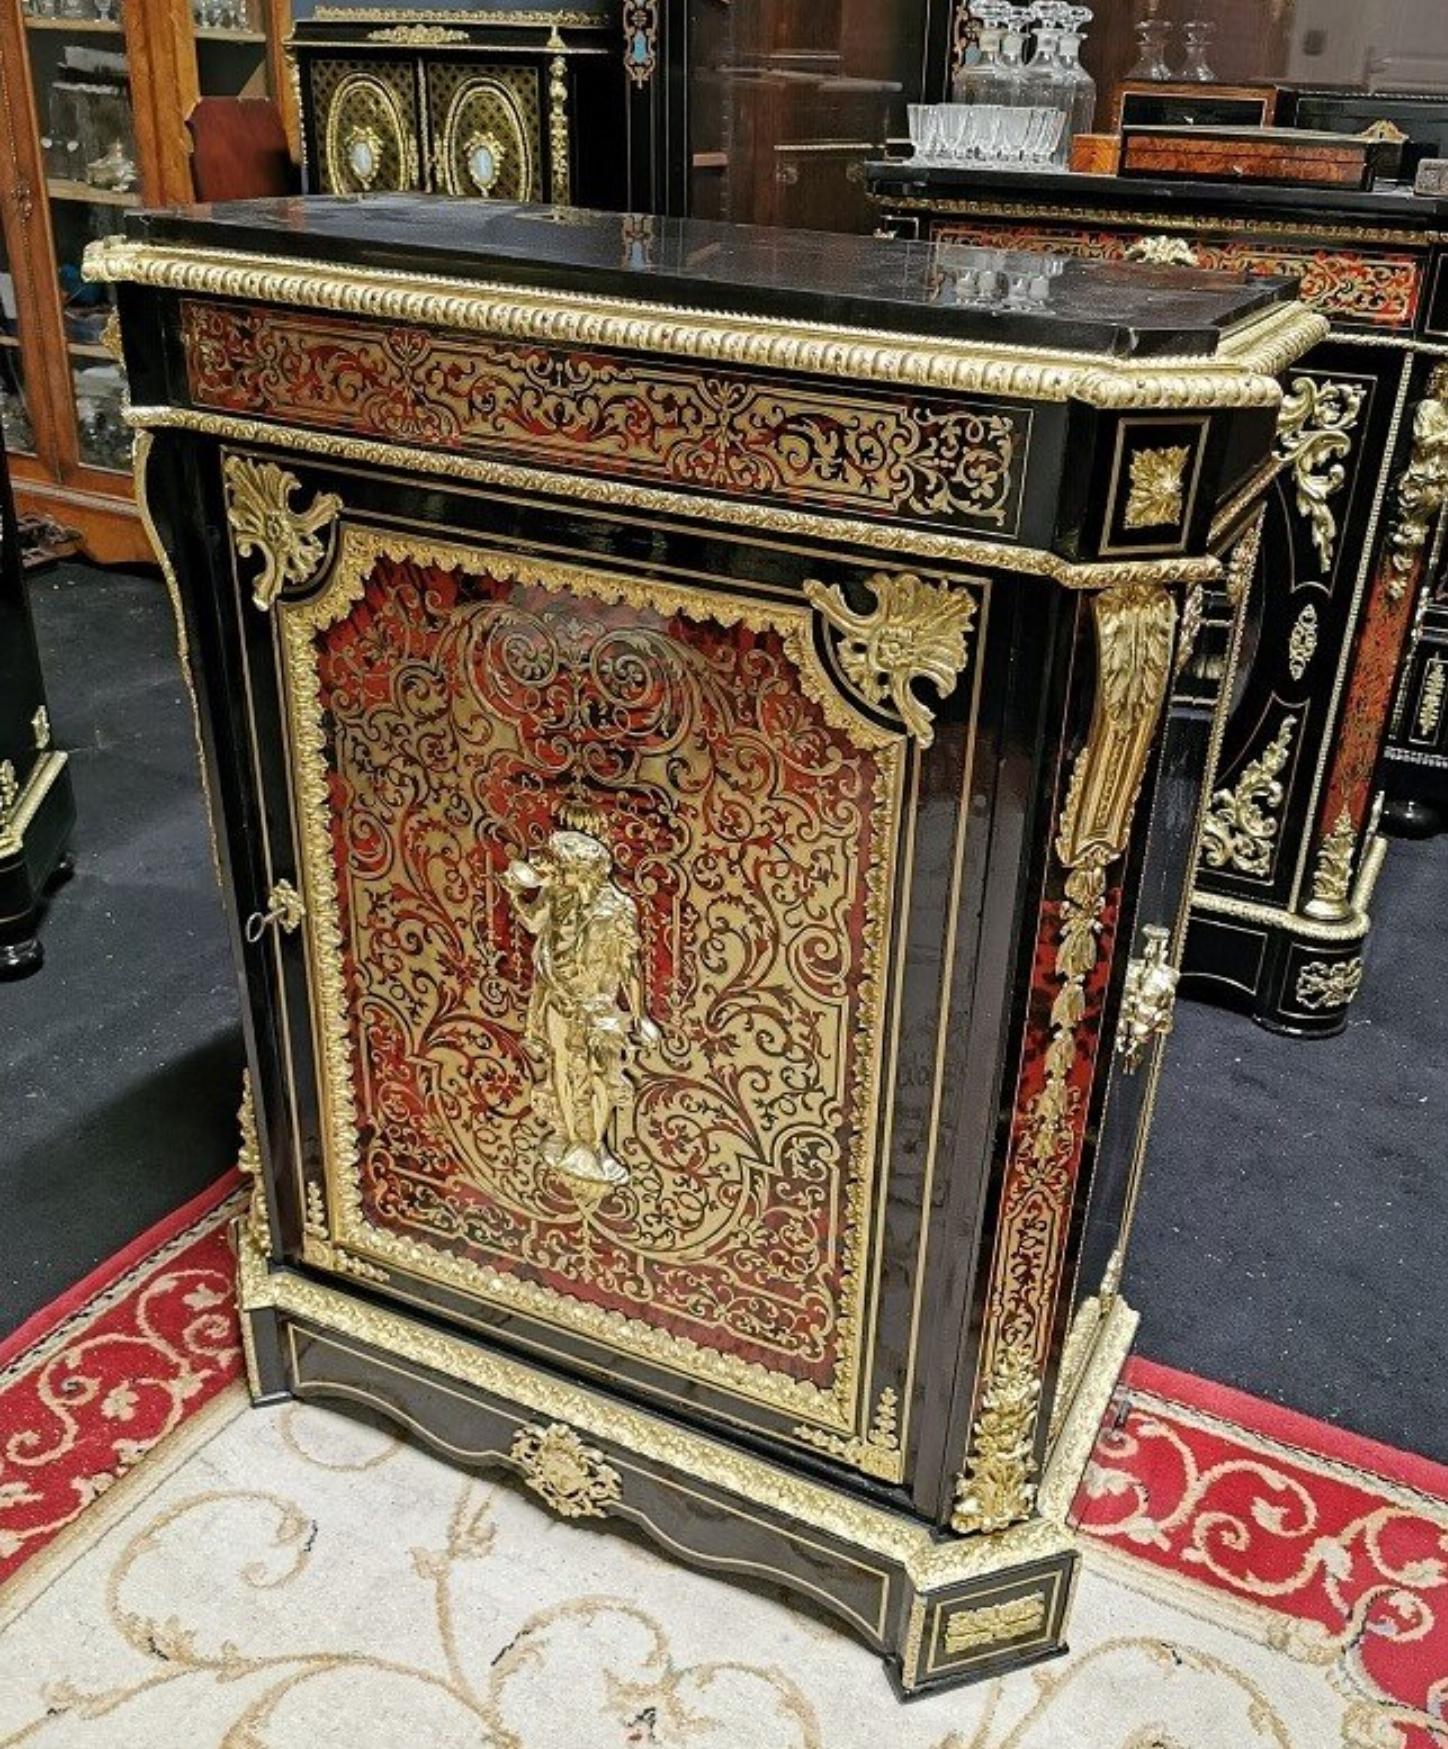 Gorgeous Louis XVI style cabinet in Boulle style marquetry in blackened pearwood, with a rich full brass door and tortoiseshell marquetry, composed of scrolls, interlacing and foliage. Important ornamentation of gilded bronzes with high and low